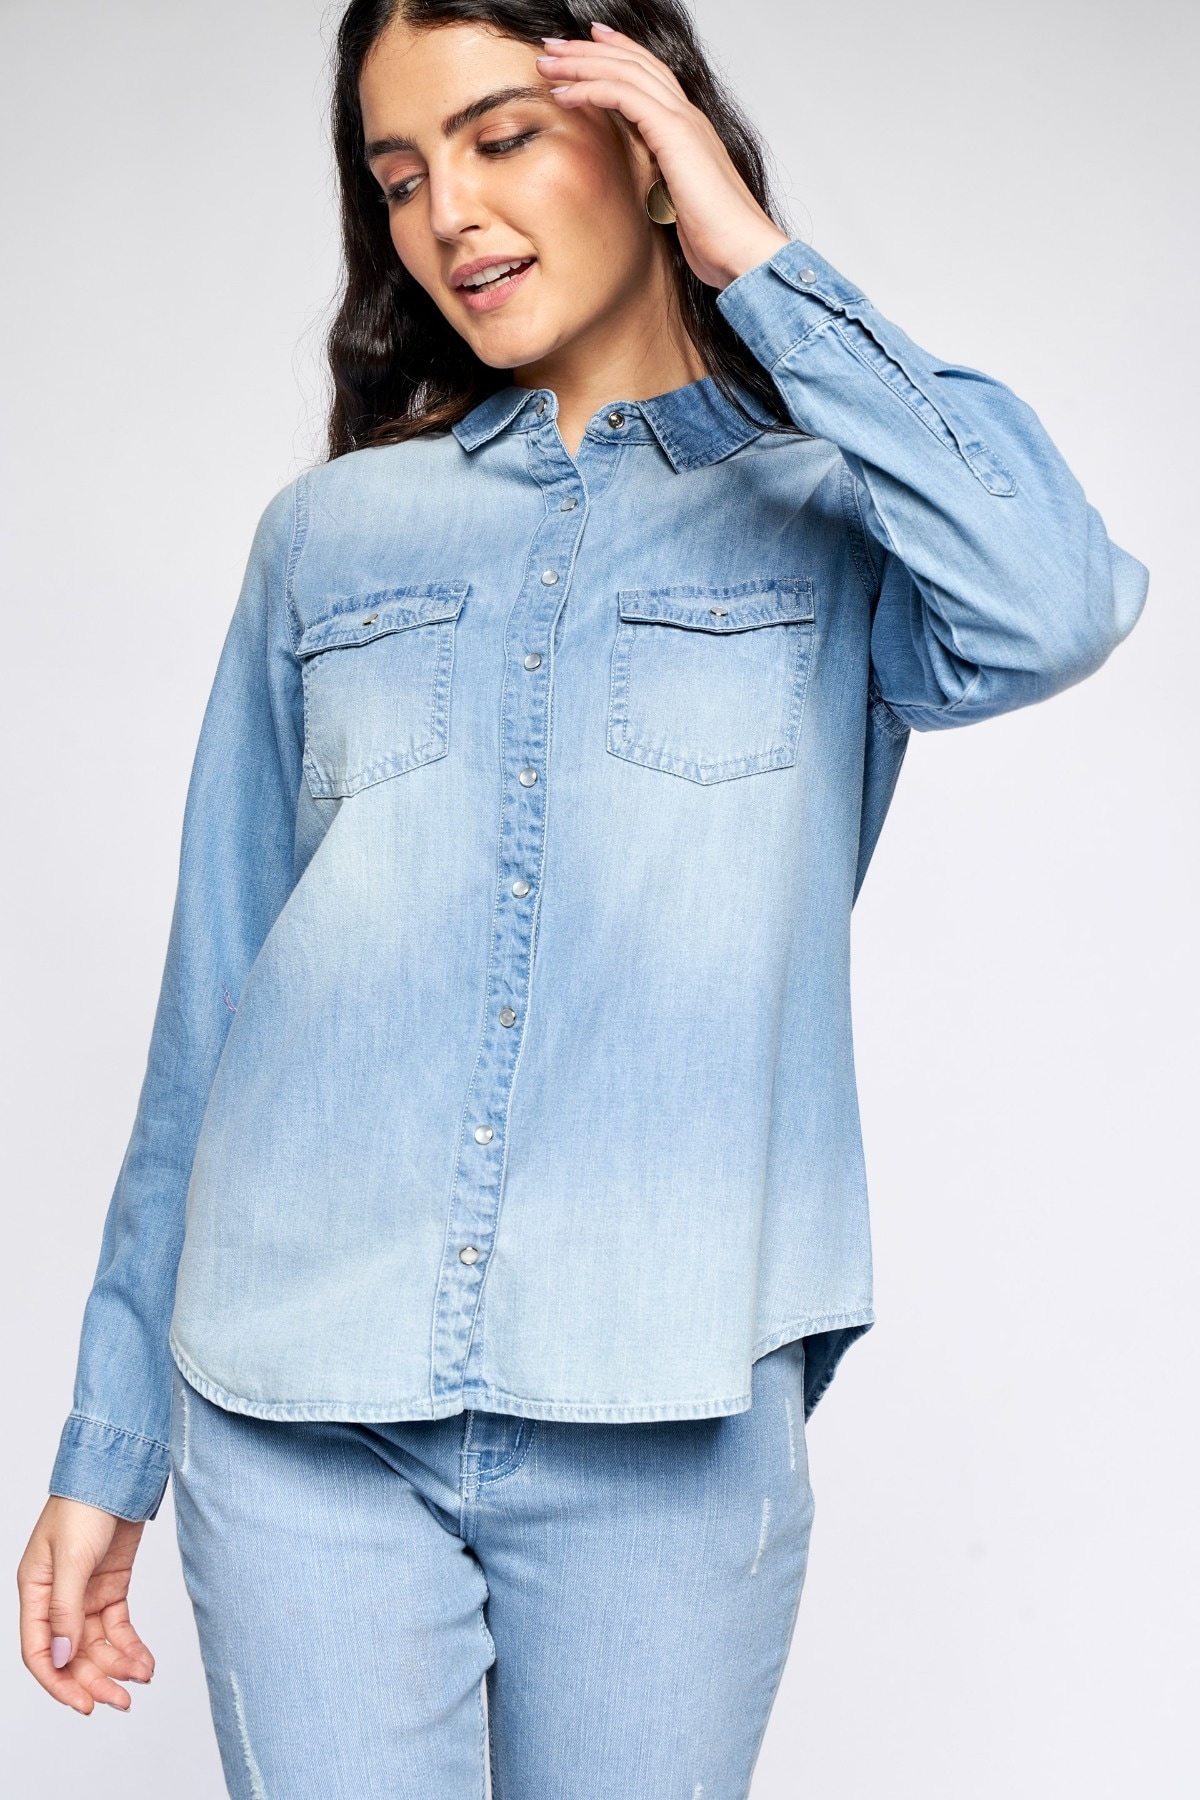 AND | Light Blue Self Design Shirt Style Top